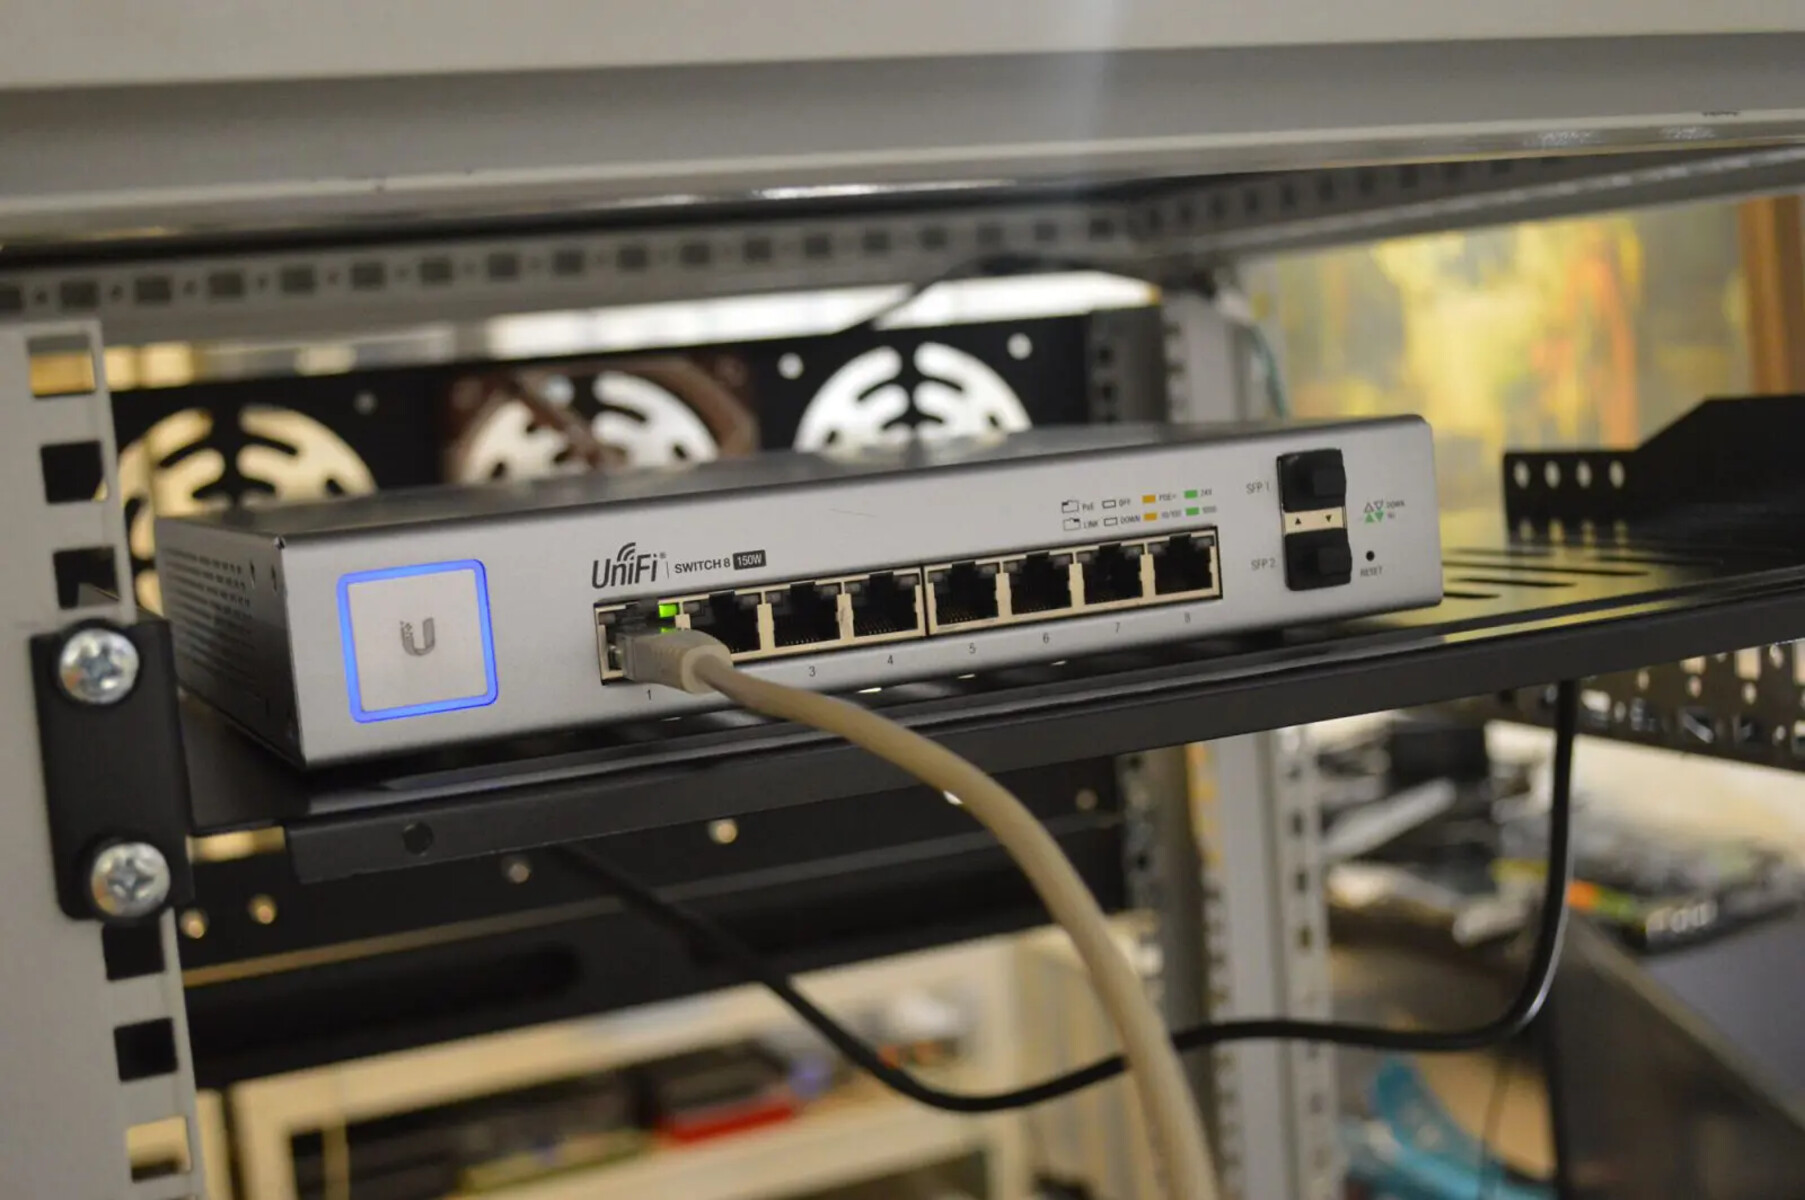 Internet Speed Drops Significantly When Hooked To Network Switch